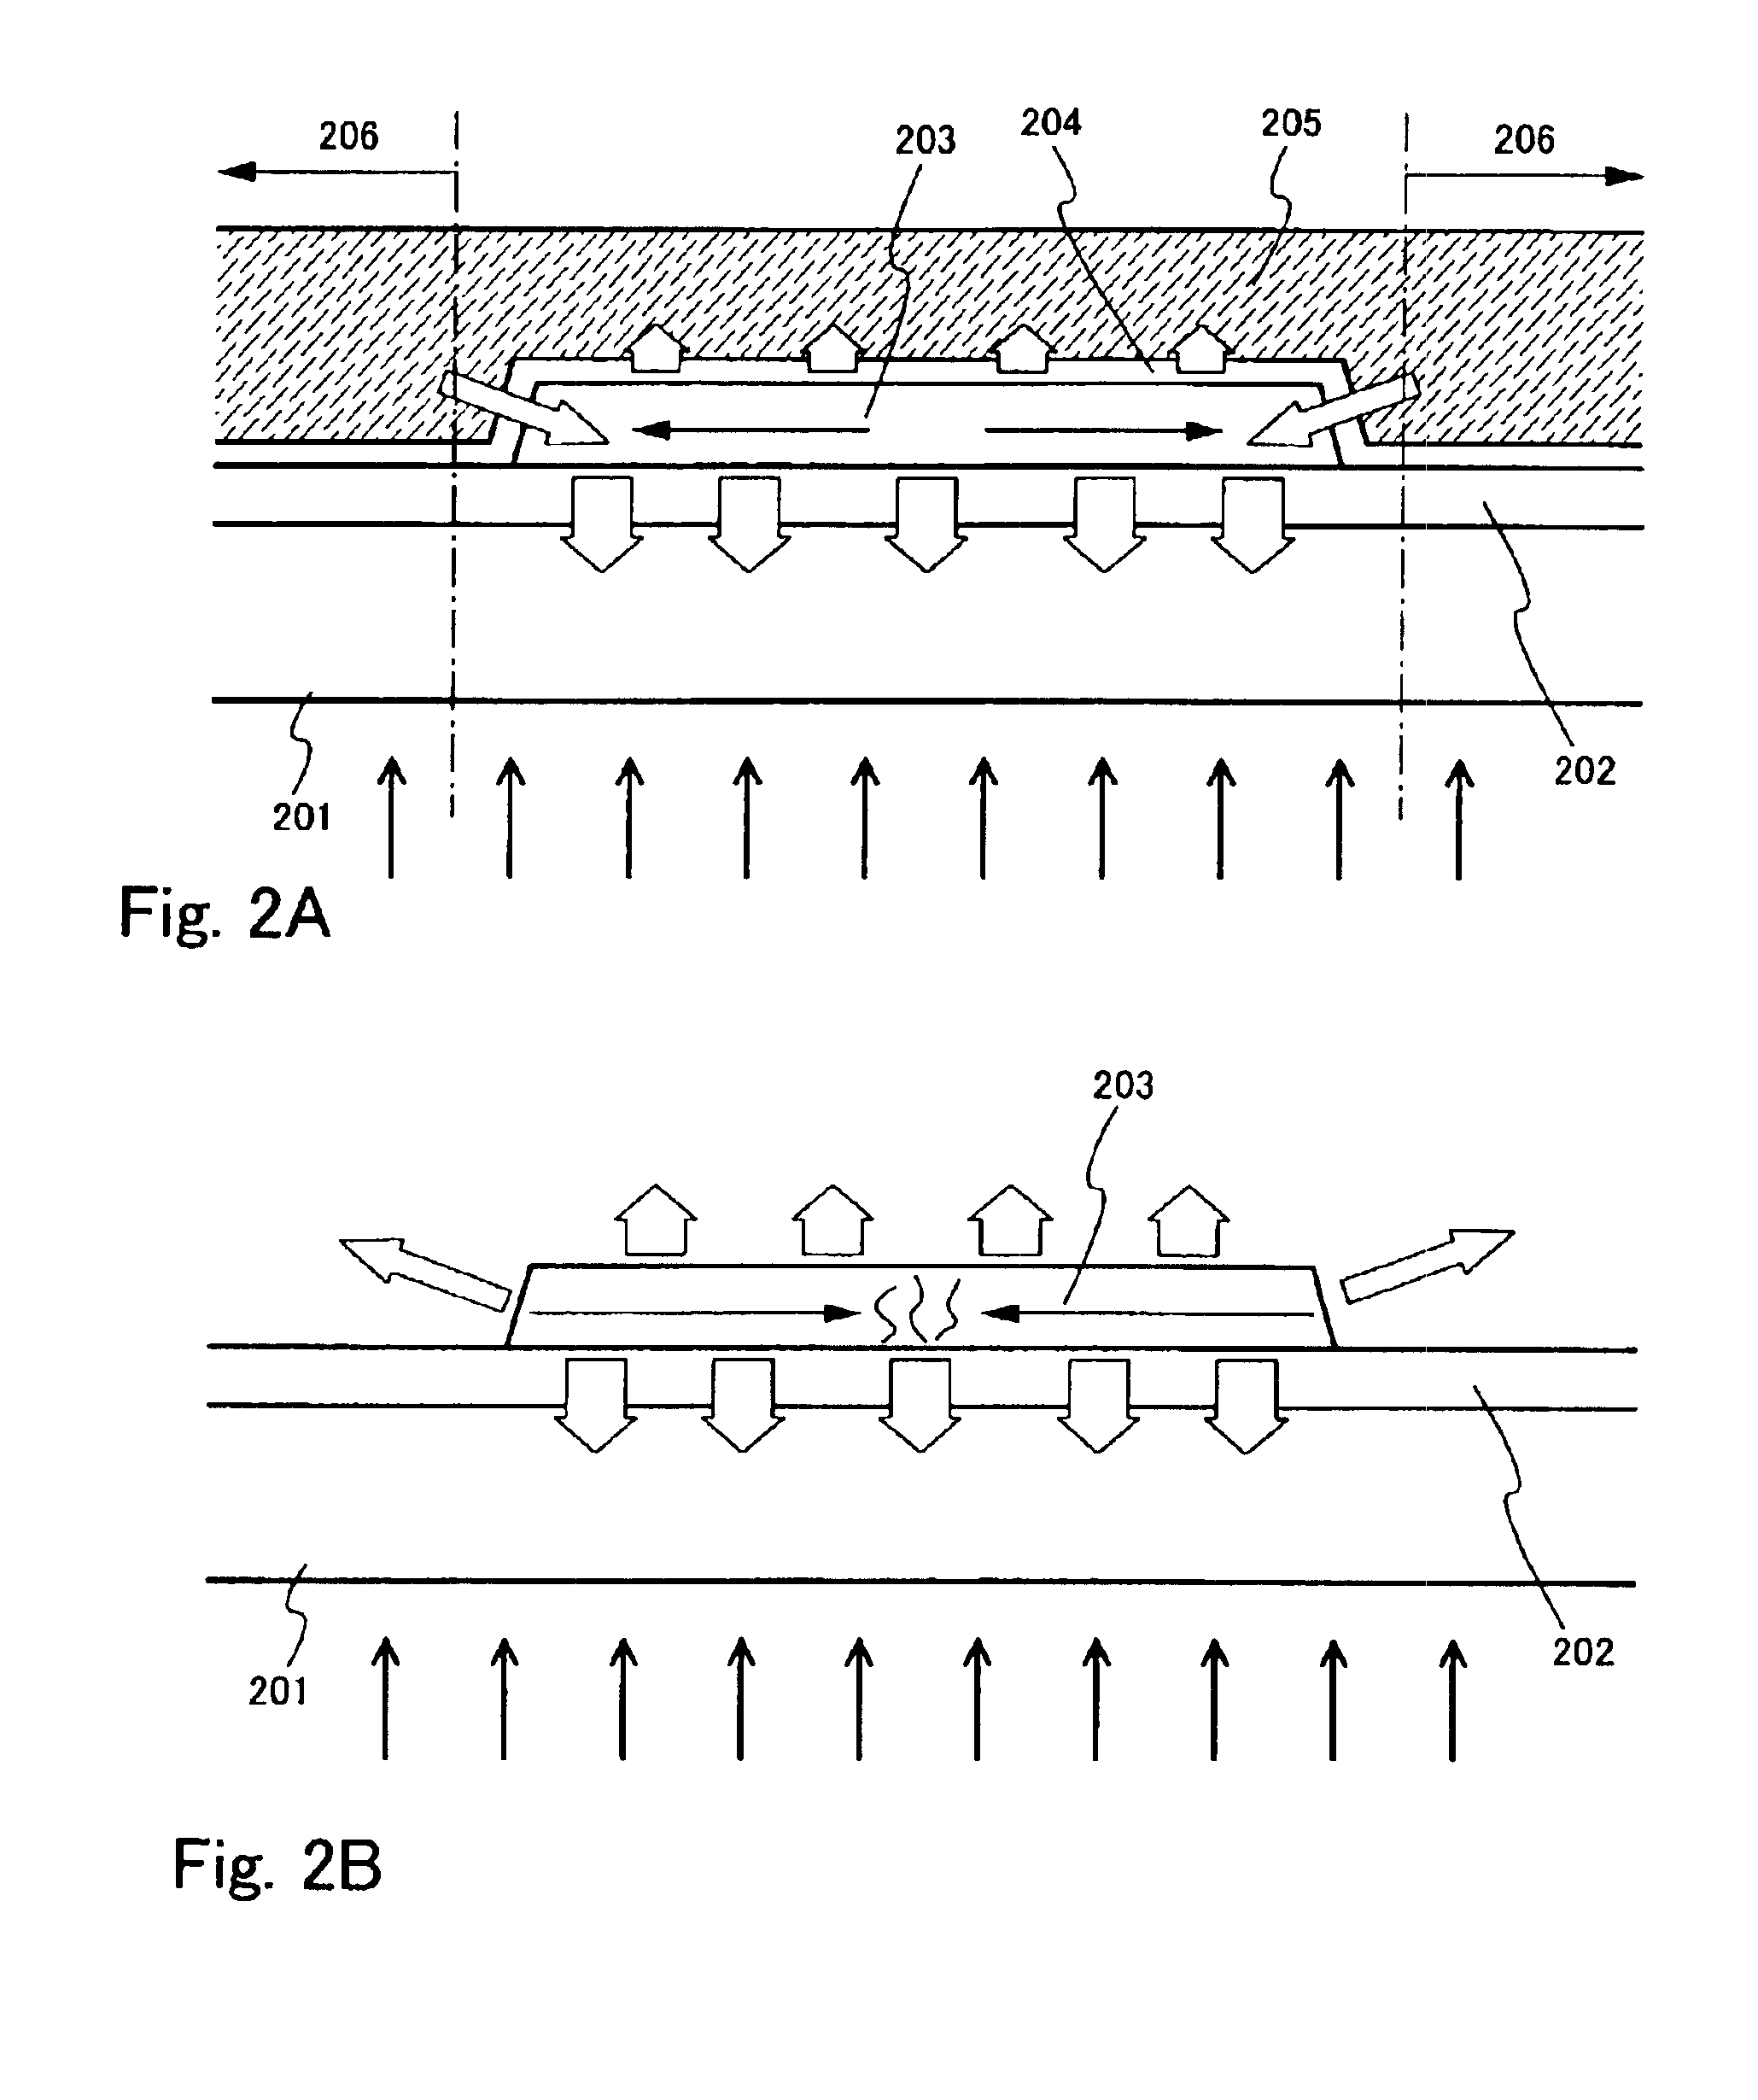 Method of manufacturing a semiconductor device by crystallization of a semiconductor region by use of a continuous wave laser beam through the substrate